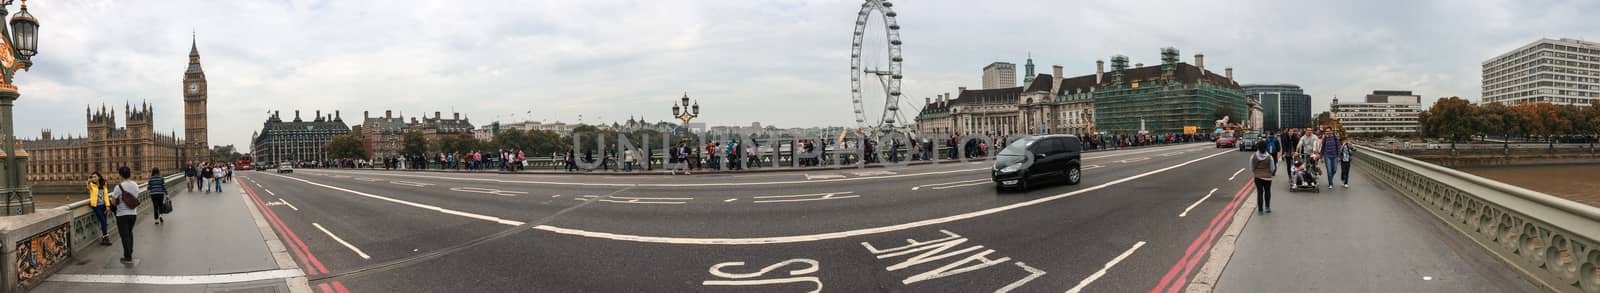 London. Westminster area panoramic view